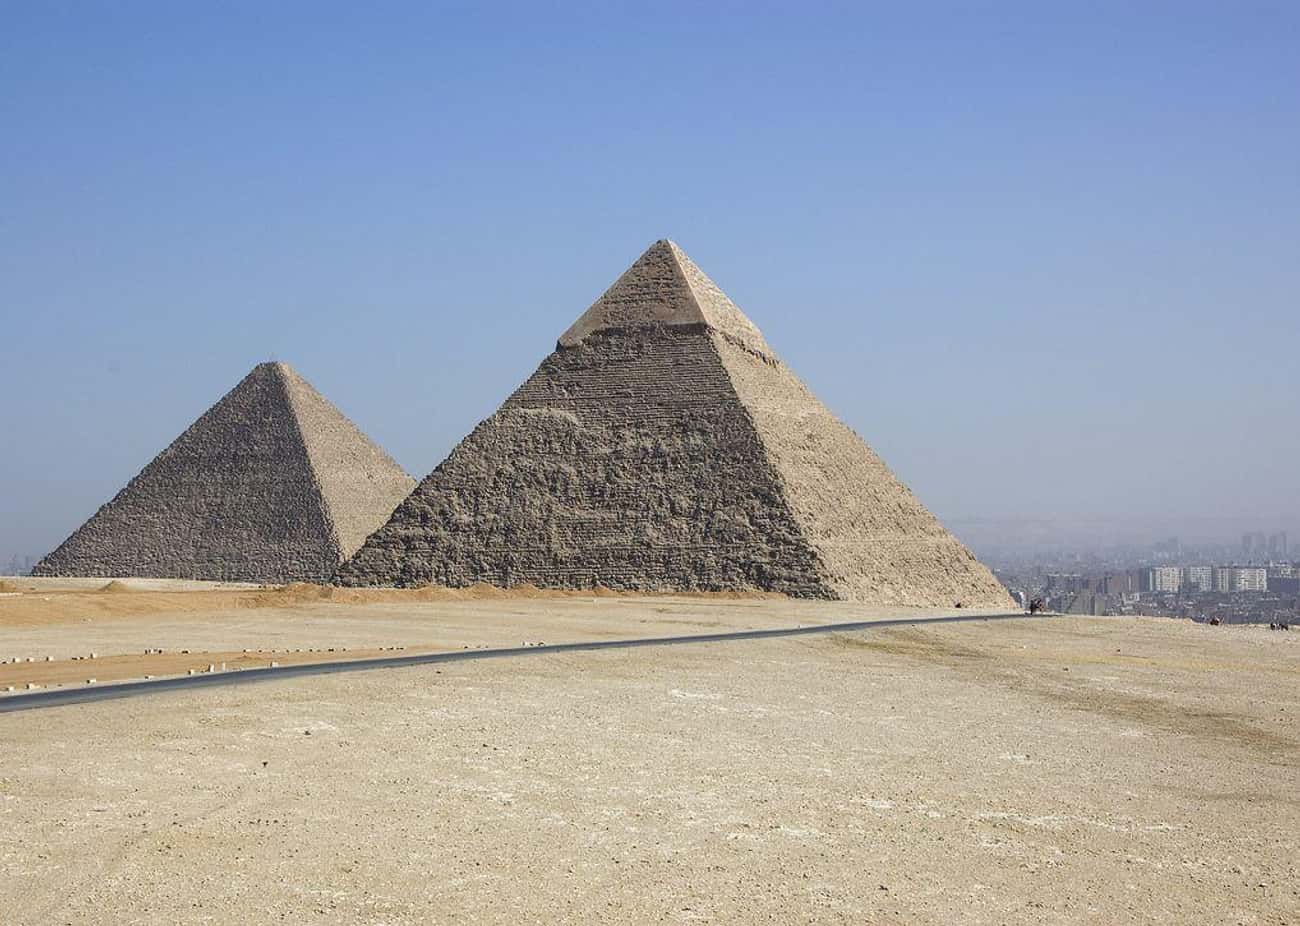 The Building of the Great Pyramids At Giza